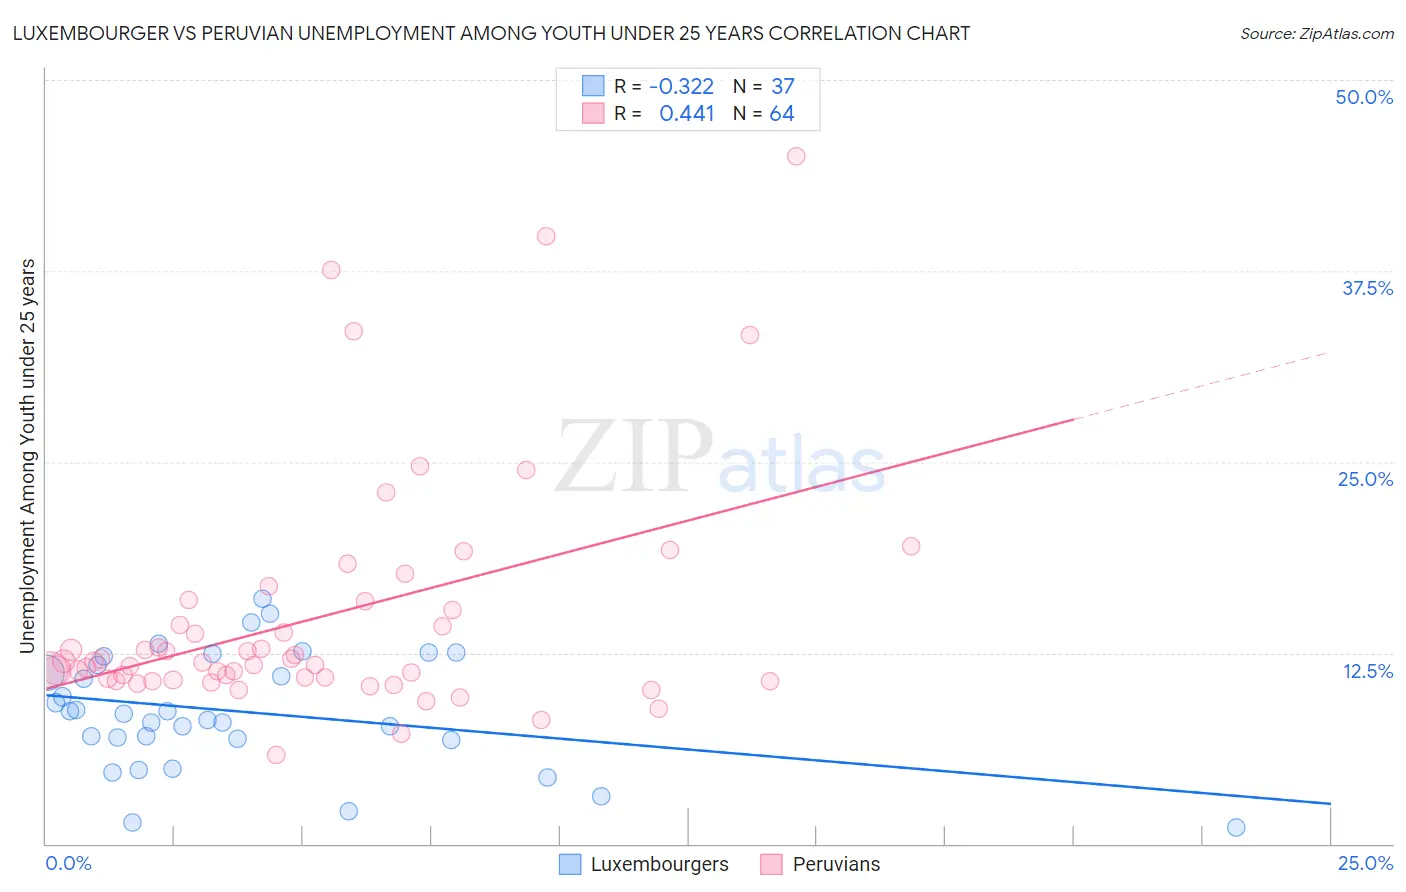 Luxembourger vs Peruvian Unemployment Among Youth under 25 years